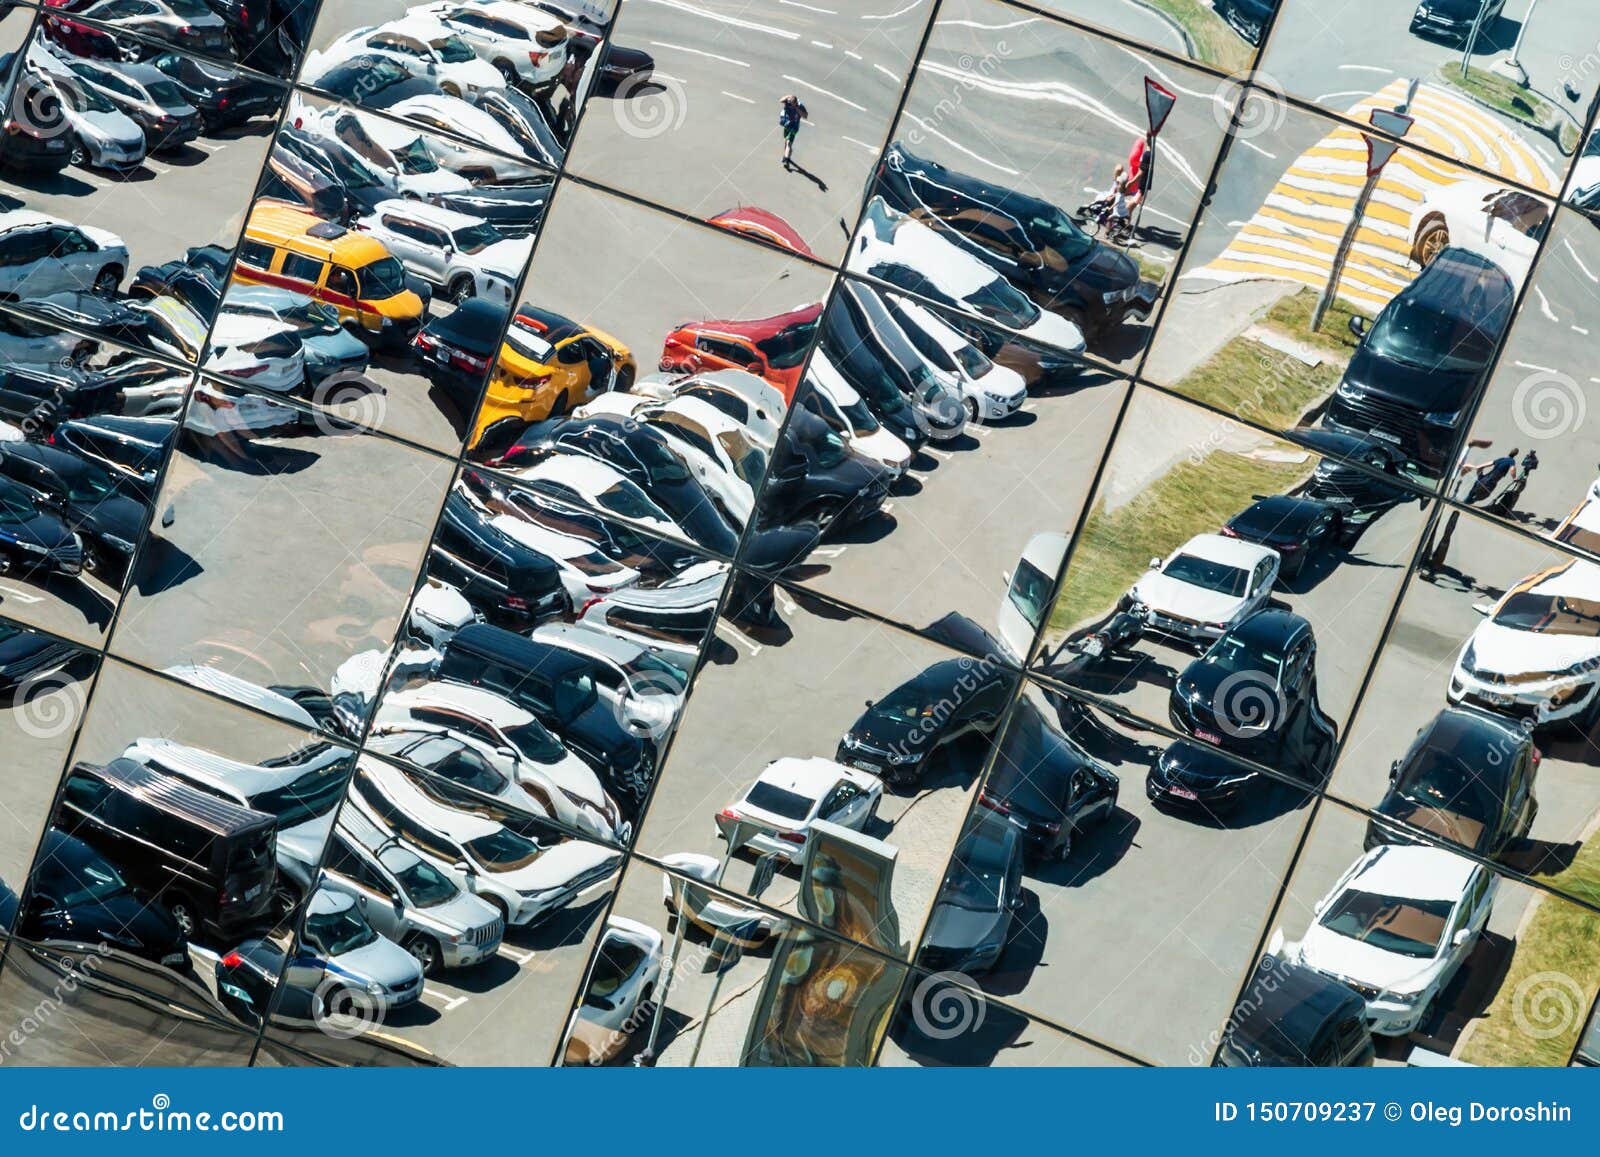 in the Glass Roof of the Lot Stock Image - Image of background, blue: 150709237